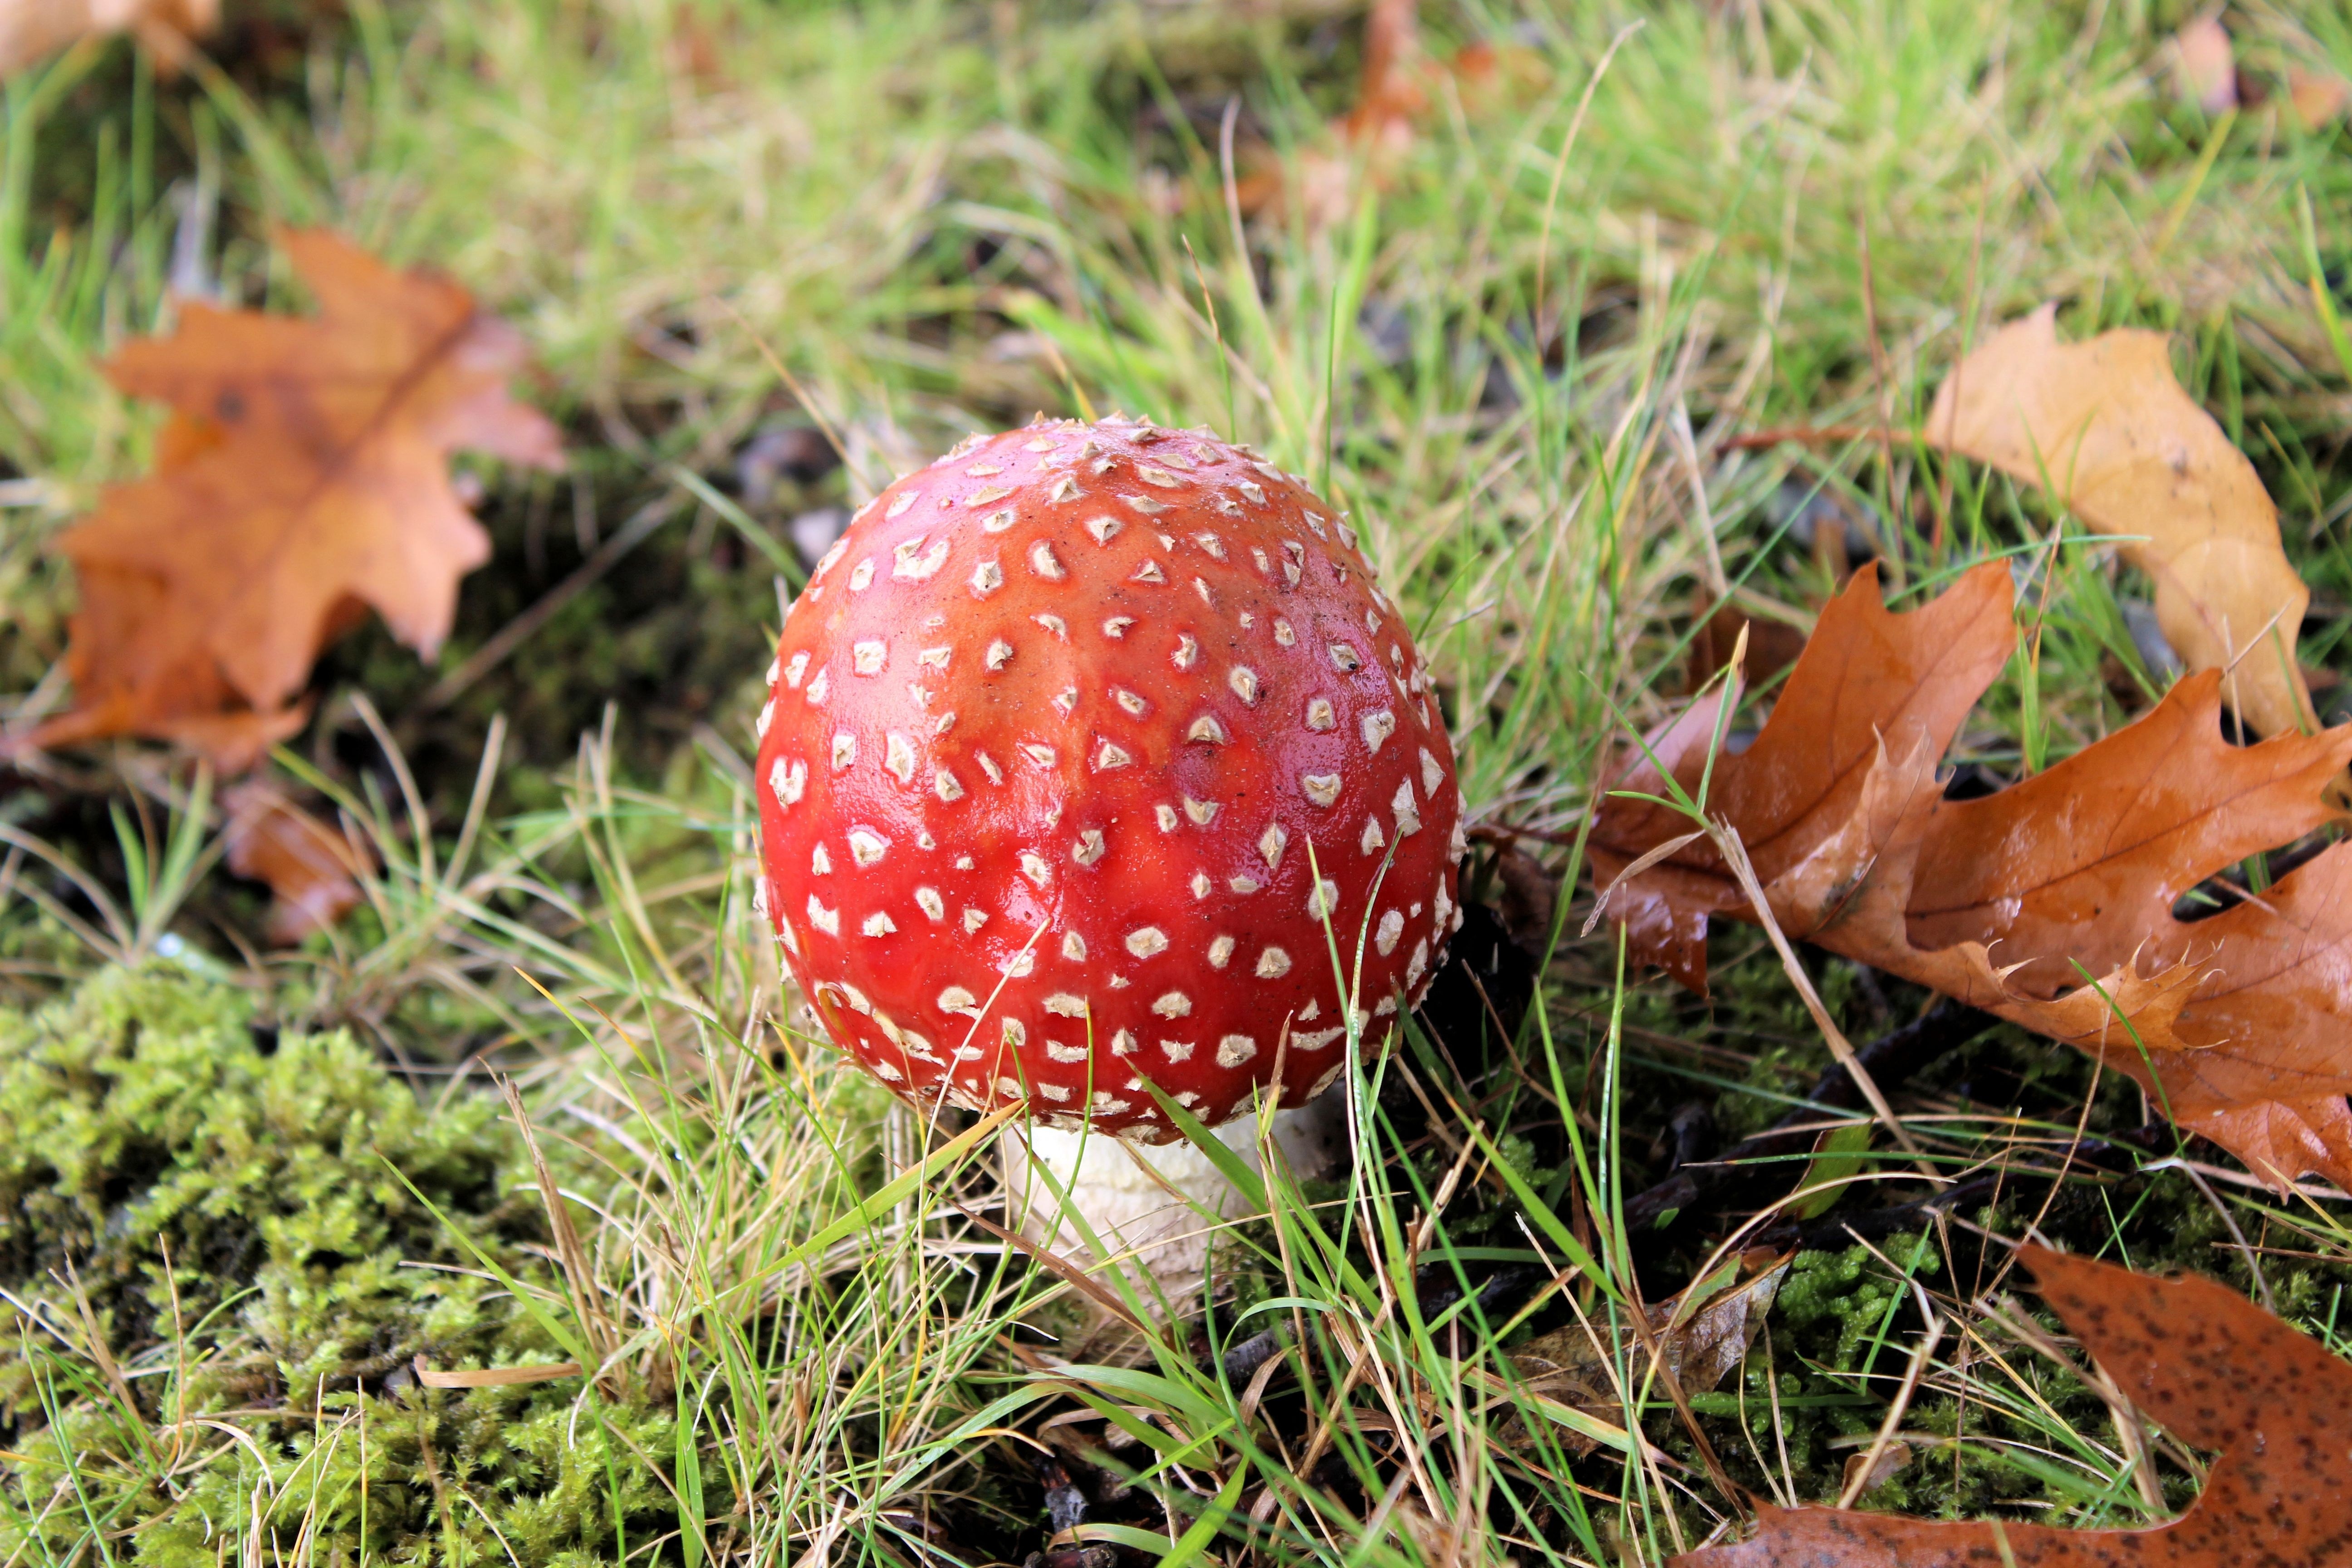 red and white mushroom on grass